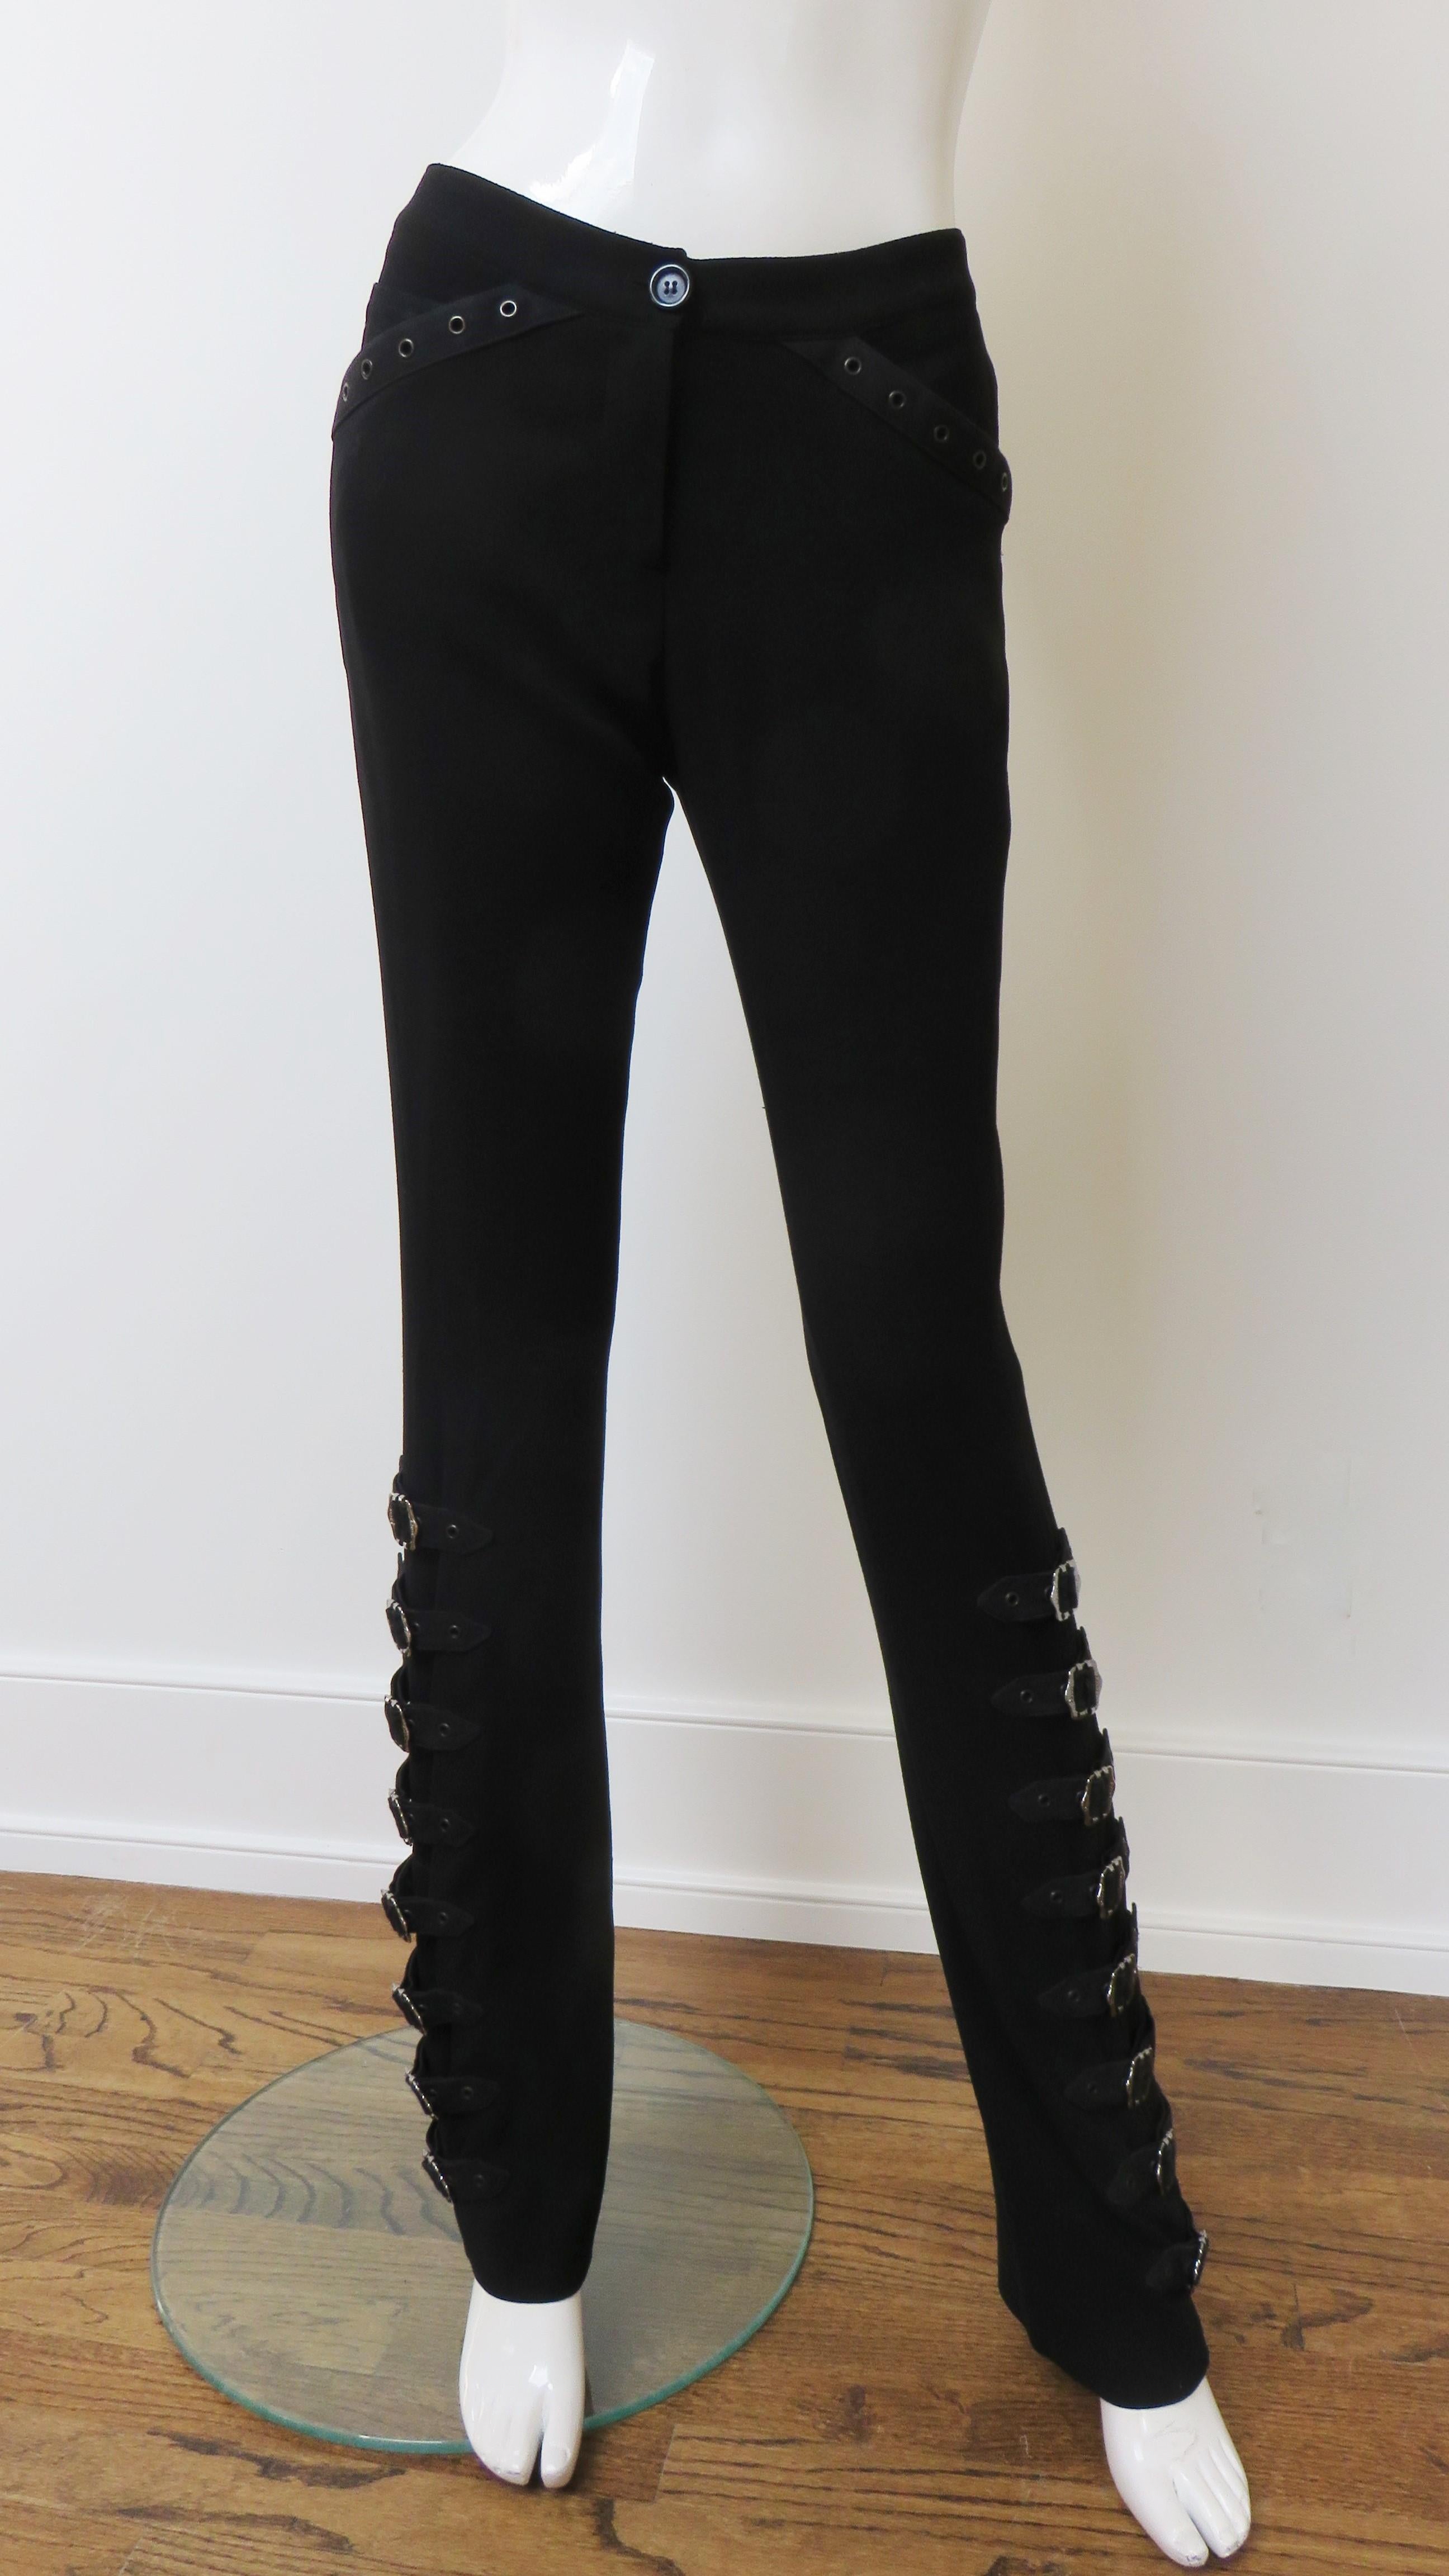 Fabulous light weight black wool pants by John Galliano for Christian Dior.  They have a button front waistband and zipper closing, grommet trimmed front pockets and iconic Dior inscribed silver buckles and straps along the side of each straight leg